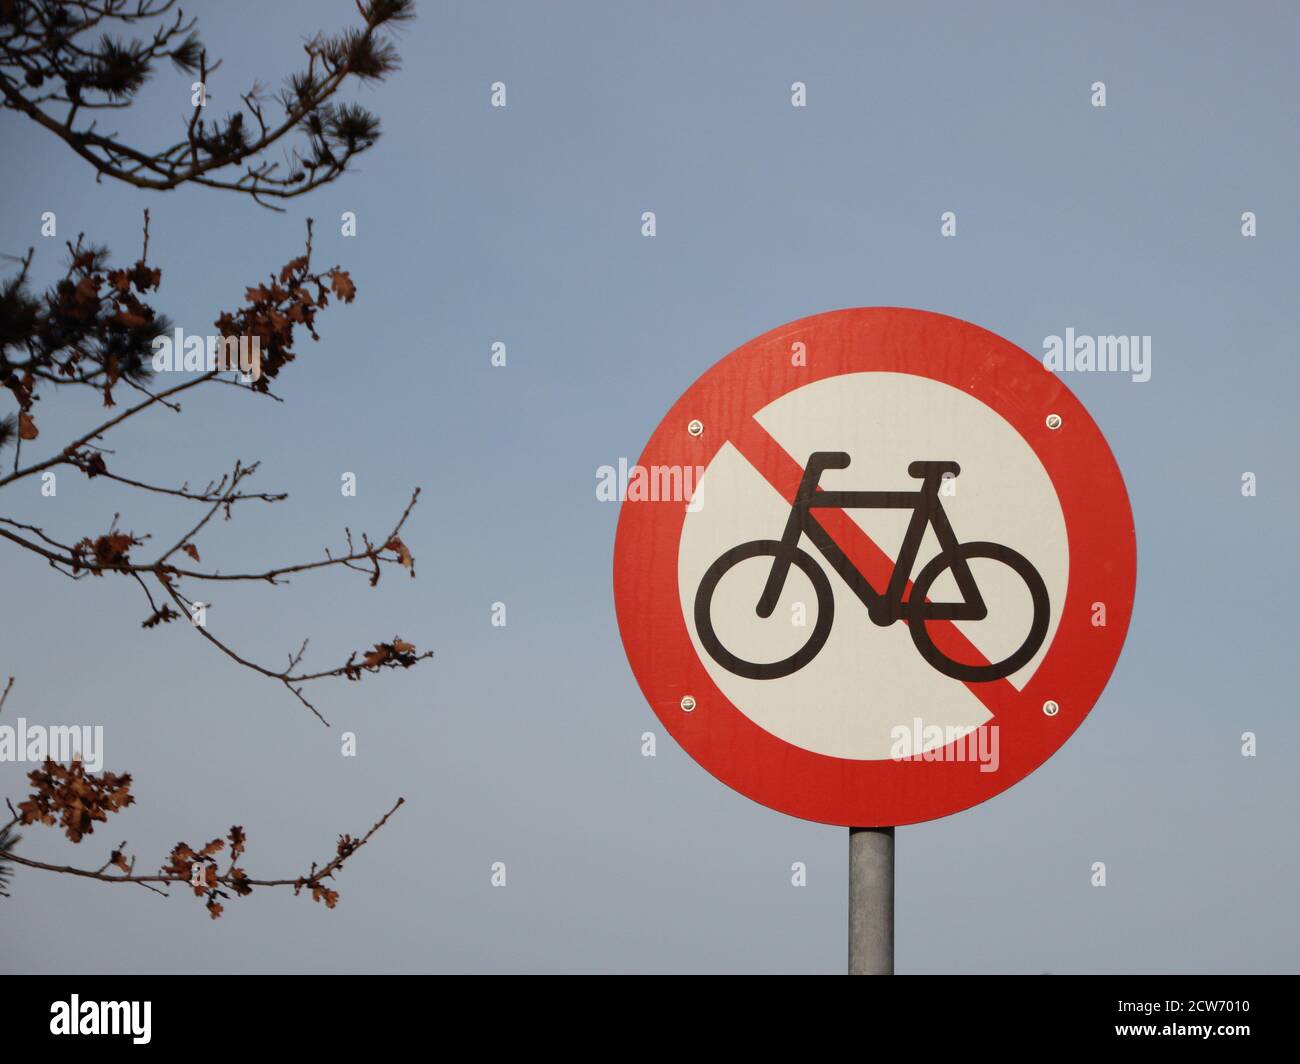 A round warning traffic road sign meaning no biking allowed. Branches from a tree can be seen to the left. Stock Photo